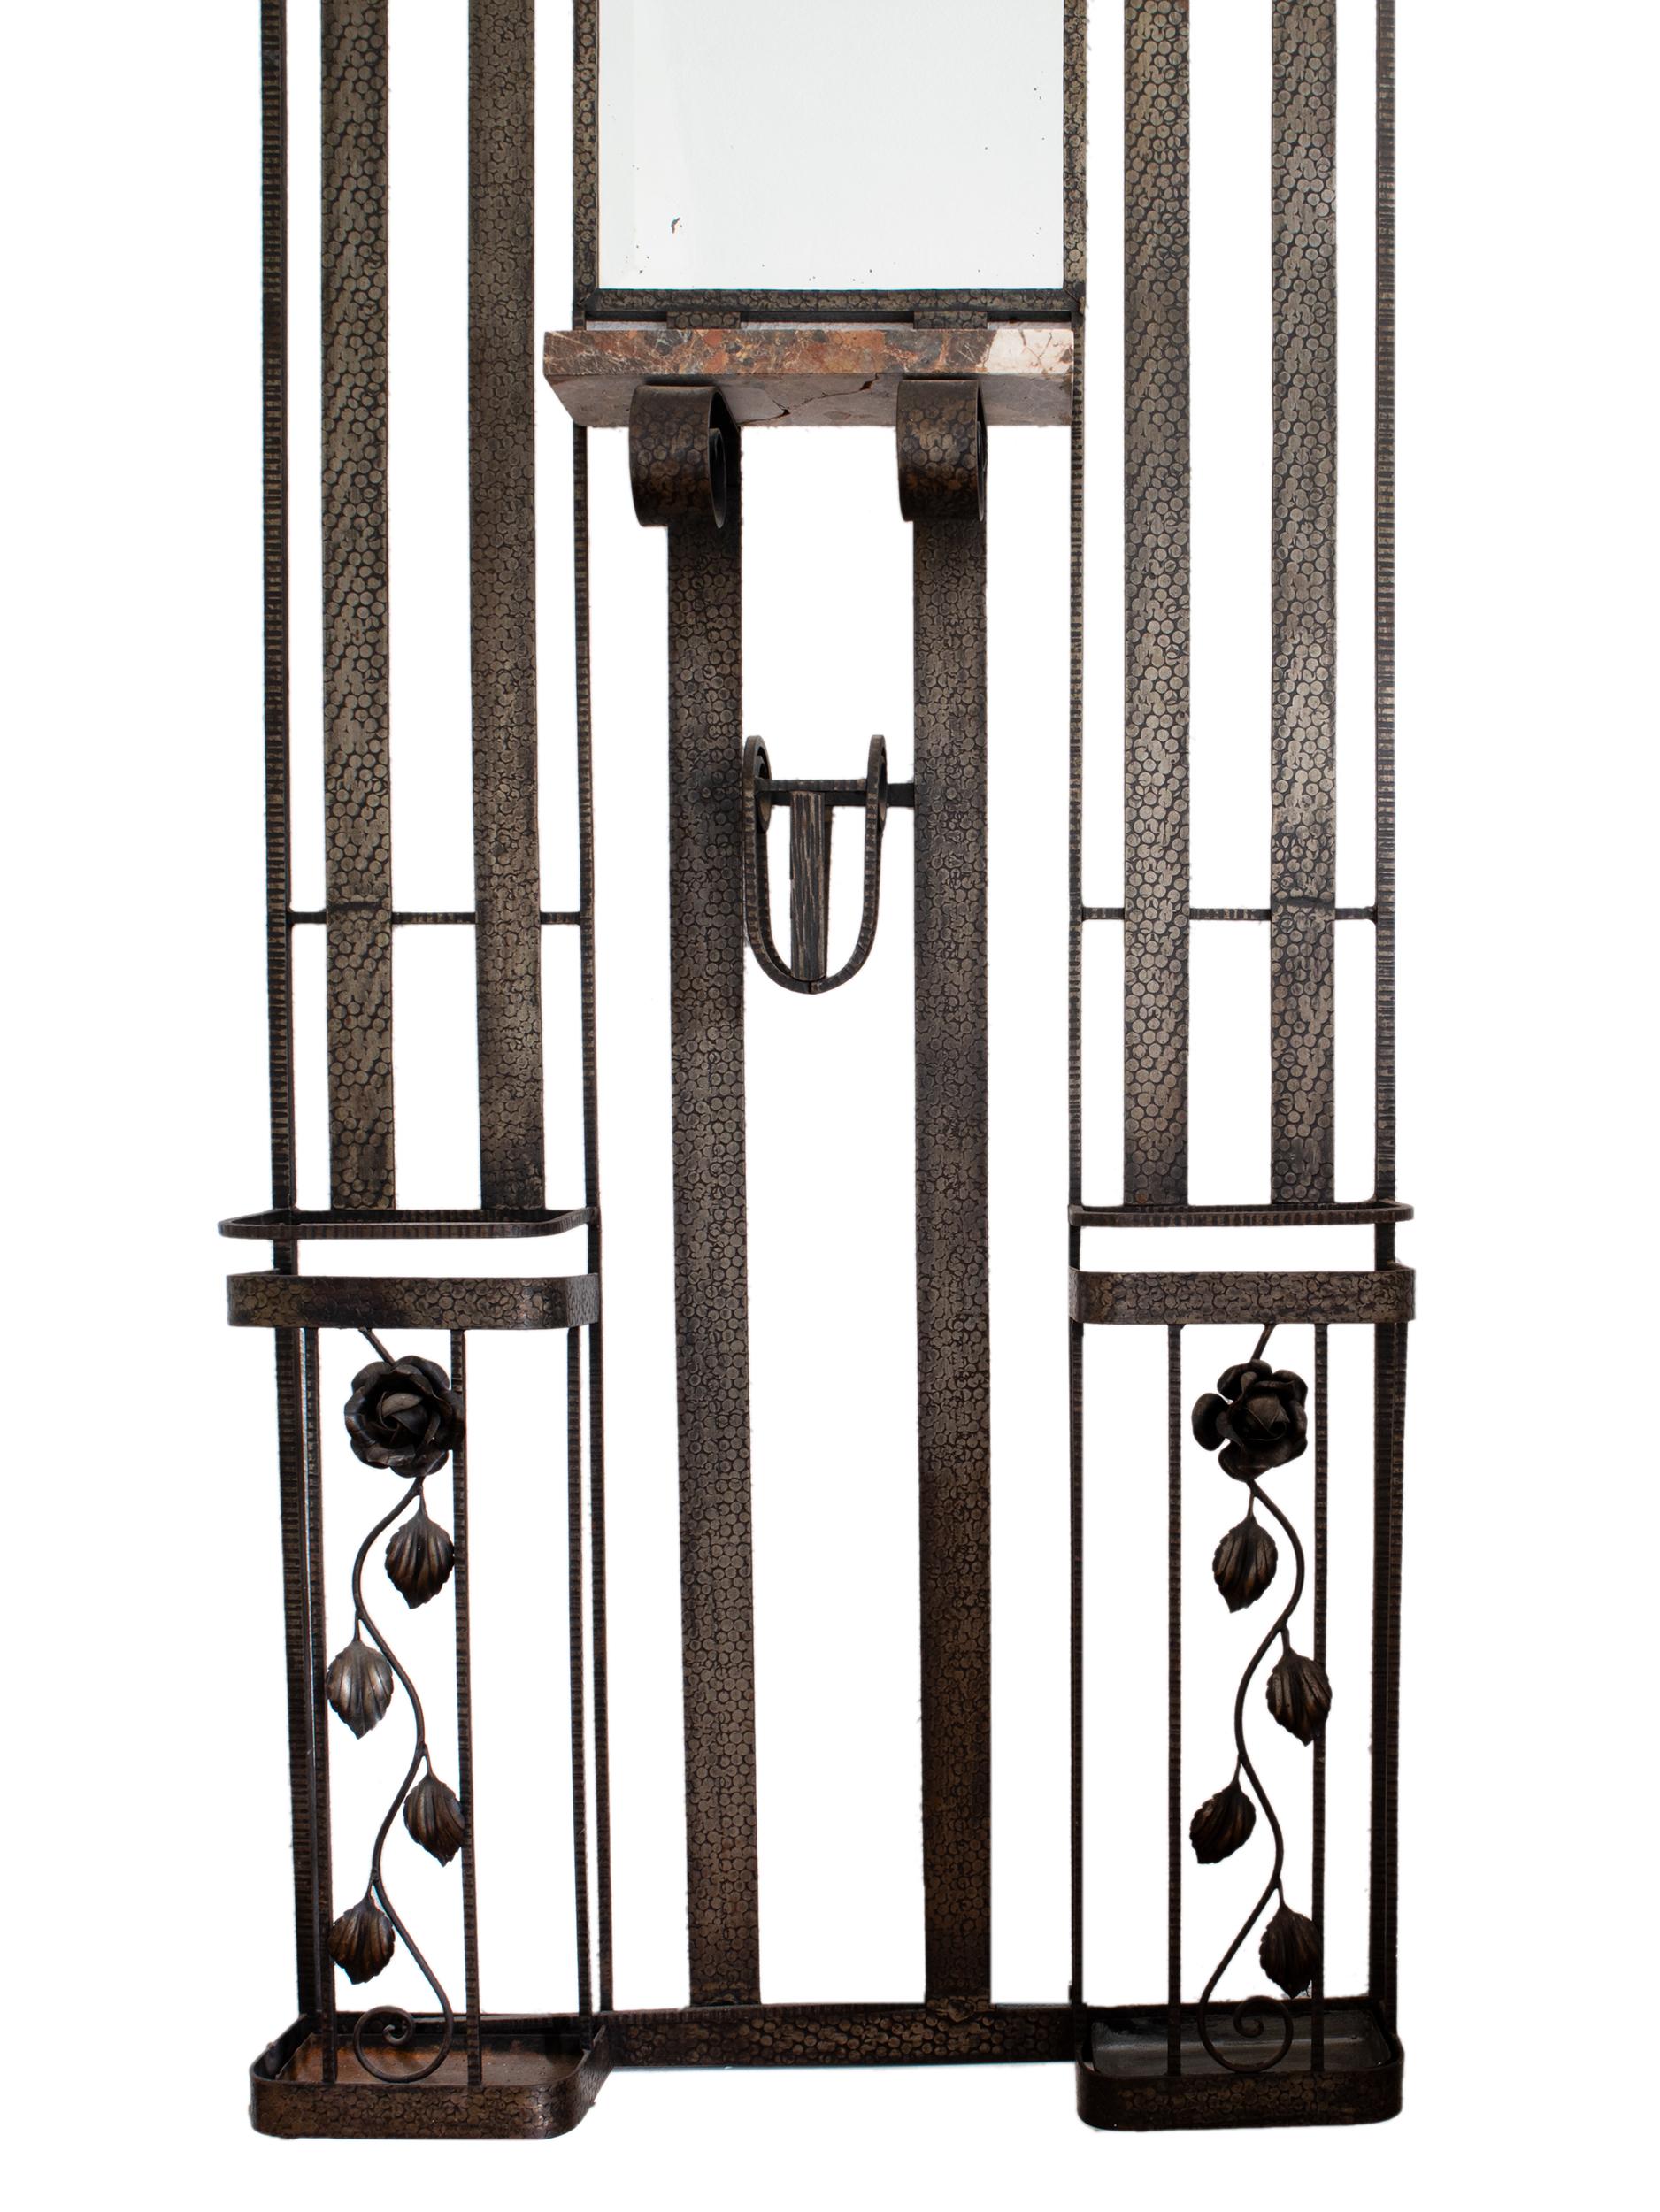 A 1930s French Art Deco wrought iron foyer coat rack or hall tree.
Wonderfully decorated with geometric and circular iron work, two electrified lights with round frosted glass cover, an overhead shelf, four coat hooks, two umbrella stand or holder,